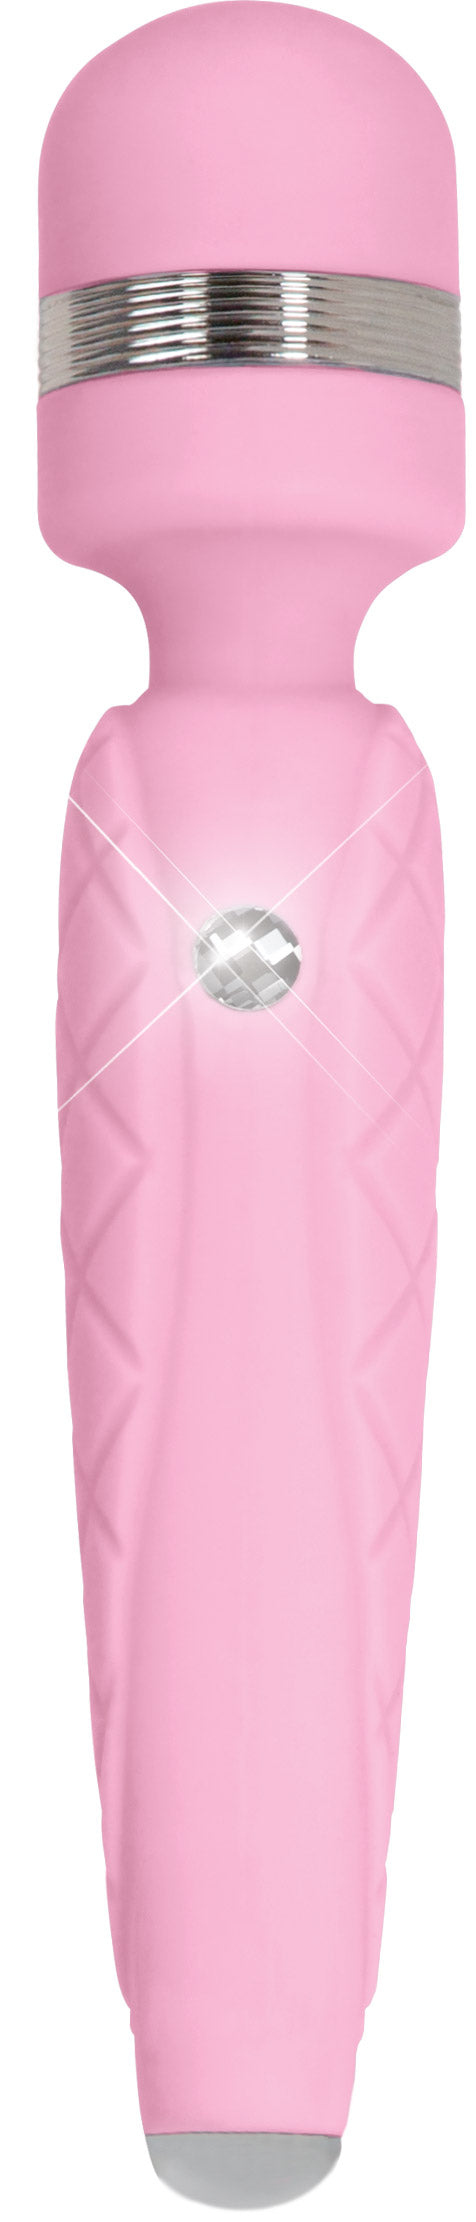 Pillow Talk Cheeky Wand Vibe With Swarovski Crystal Pink - Just for you desires